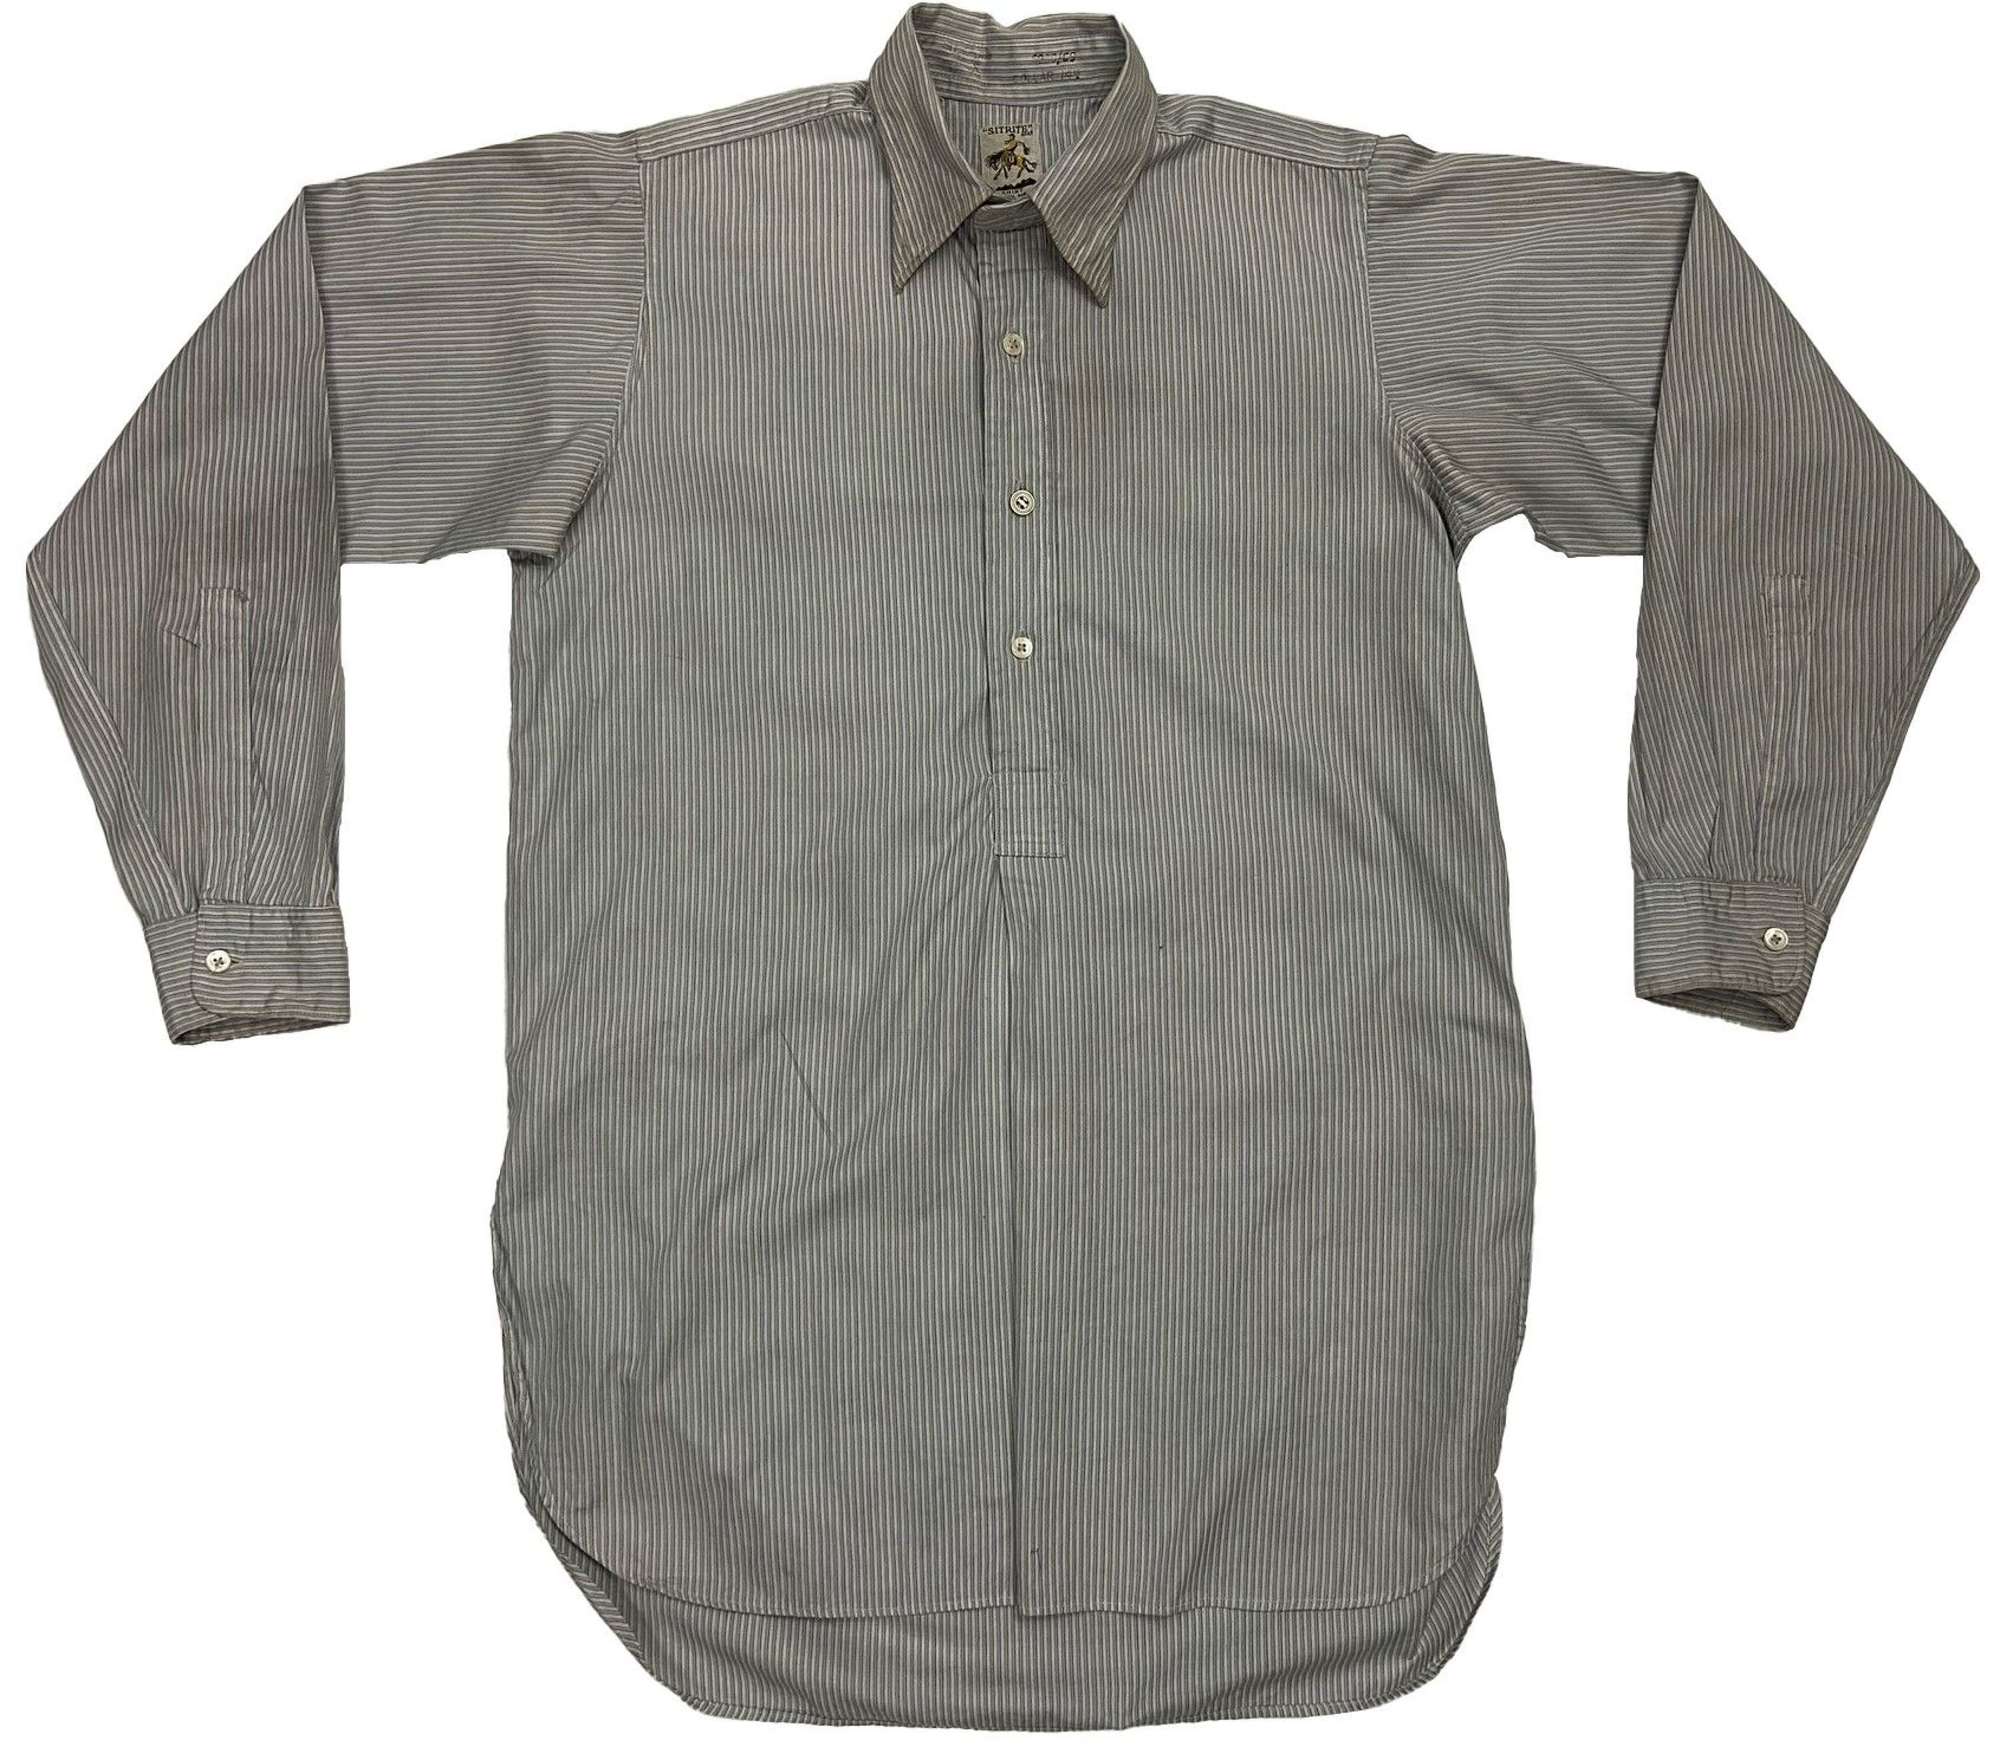 Original 1940s Men's Collared Shirt by 'Sitrite' (2)